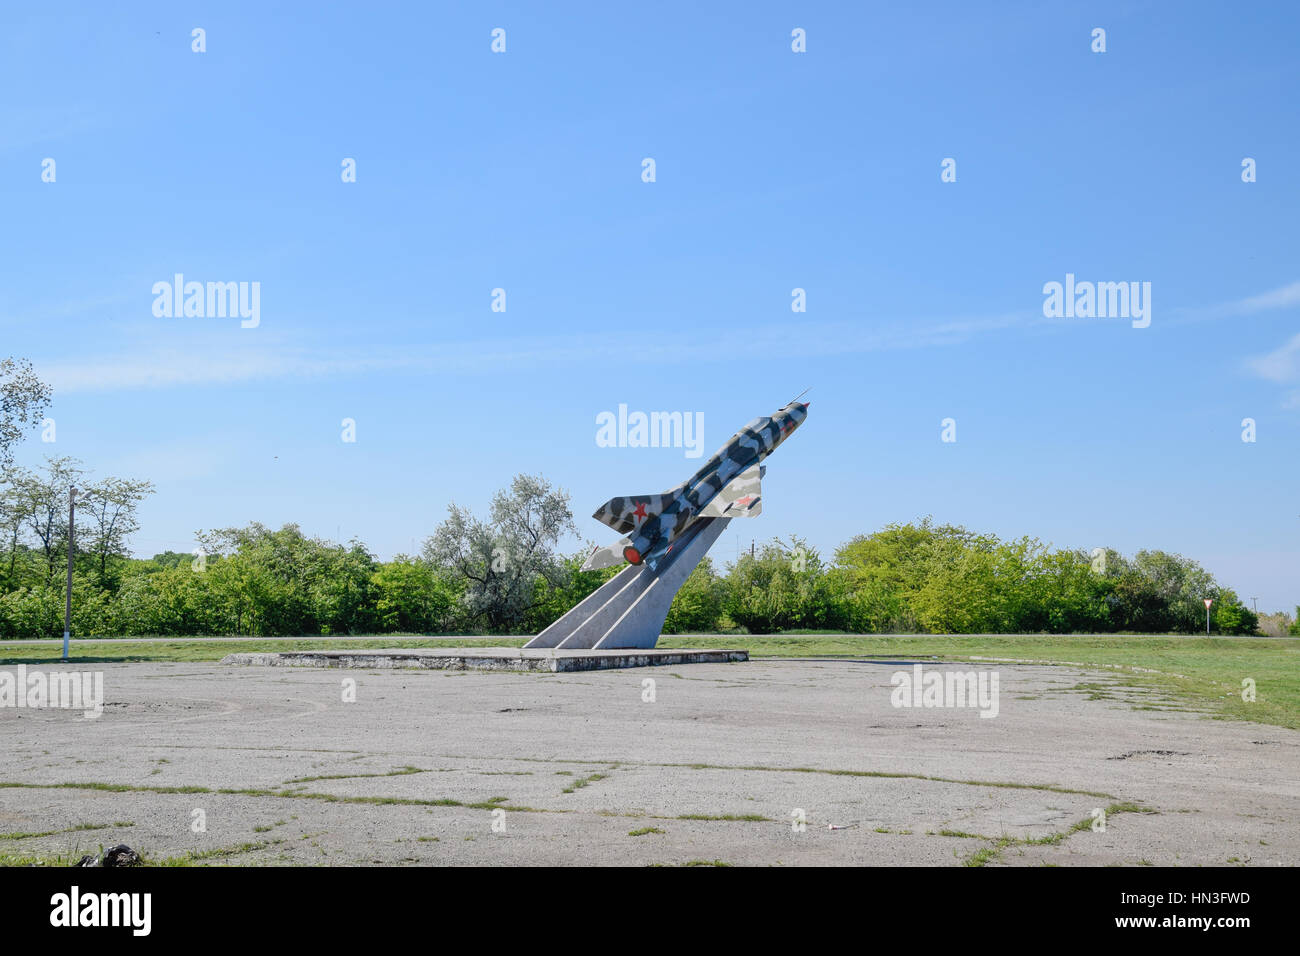 Poltavskaya village, Russia - August 22, 2016: Monument to the fighter aircraft Stock Photo